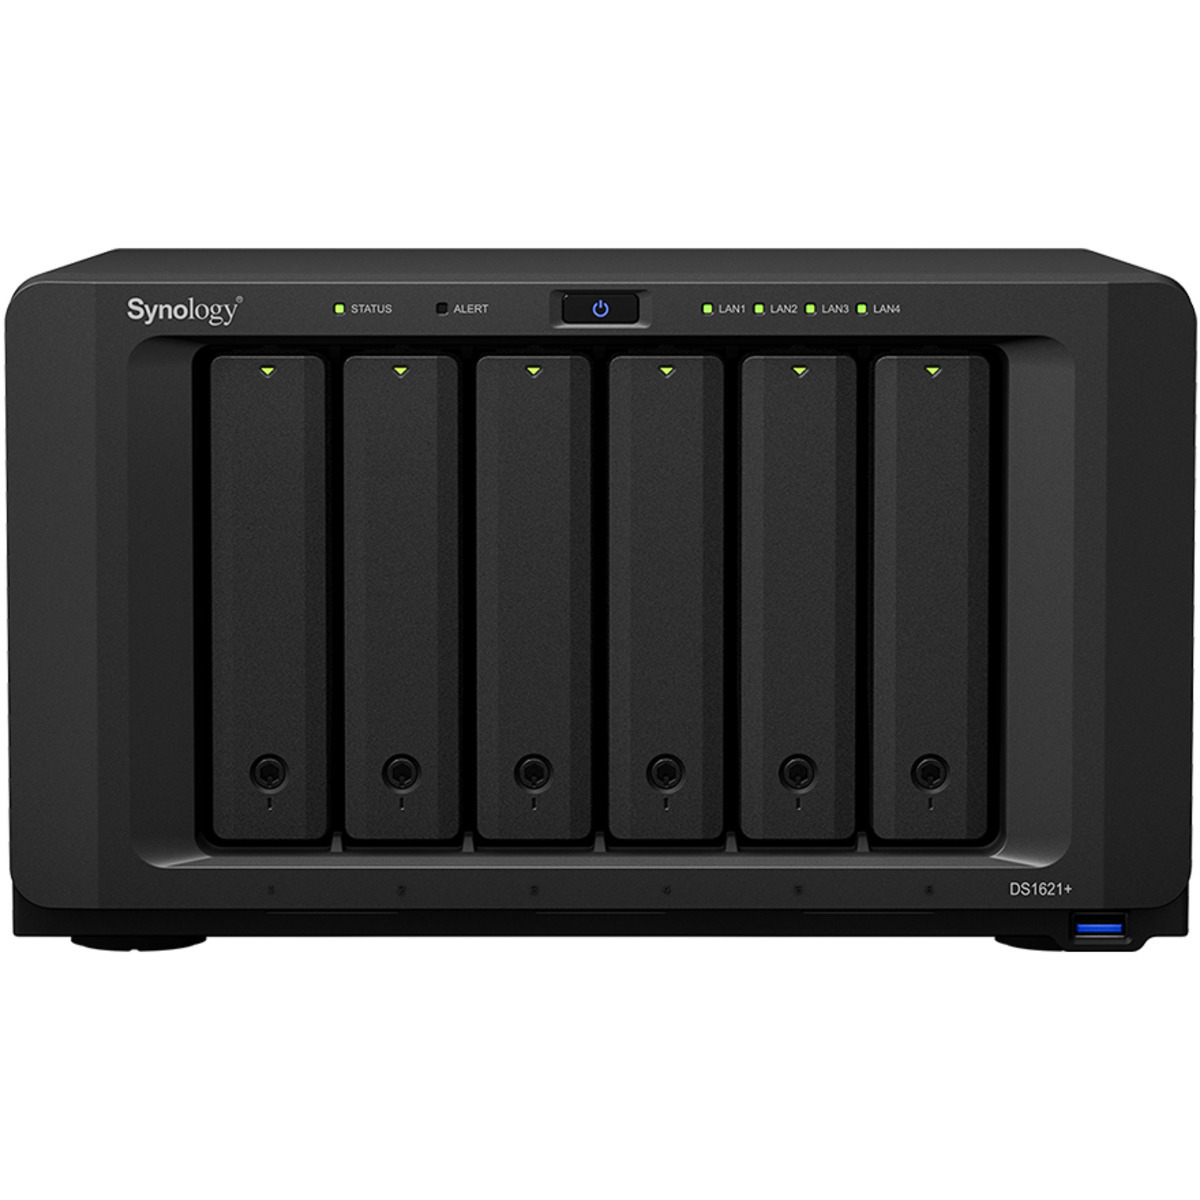 Synology DiskStation DS1621+ 56tb 6-Bay Desktop Multimedia / Power User / Business NAS - Network Attached Storage Device 4x14tb Western Digital Red Pro WD142KFGX 3.5 7200rpm SATA 6Gb/s HDD NAS Class Drives Installed - Burn-In Tested - FREE RAM UPGRADE DiskStation DS1621+